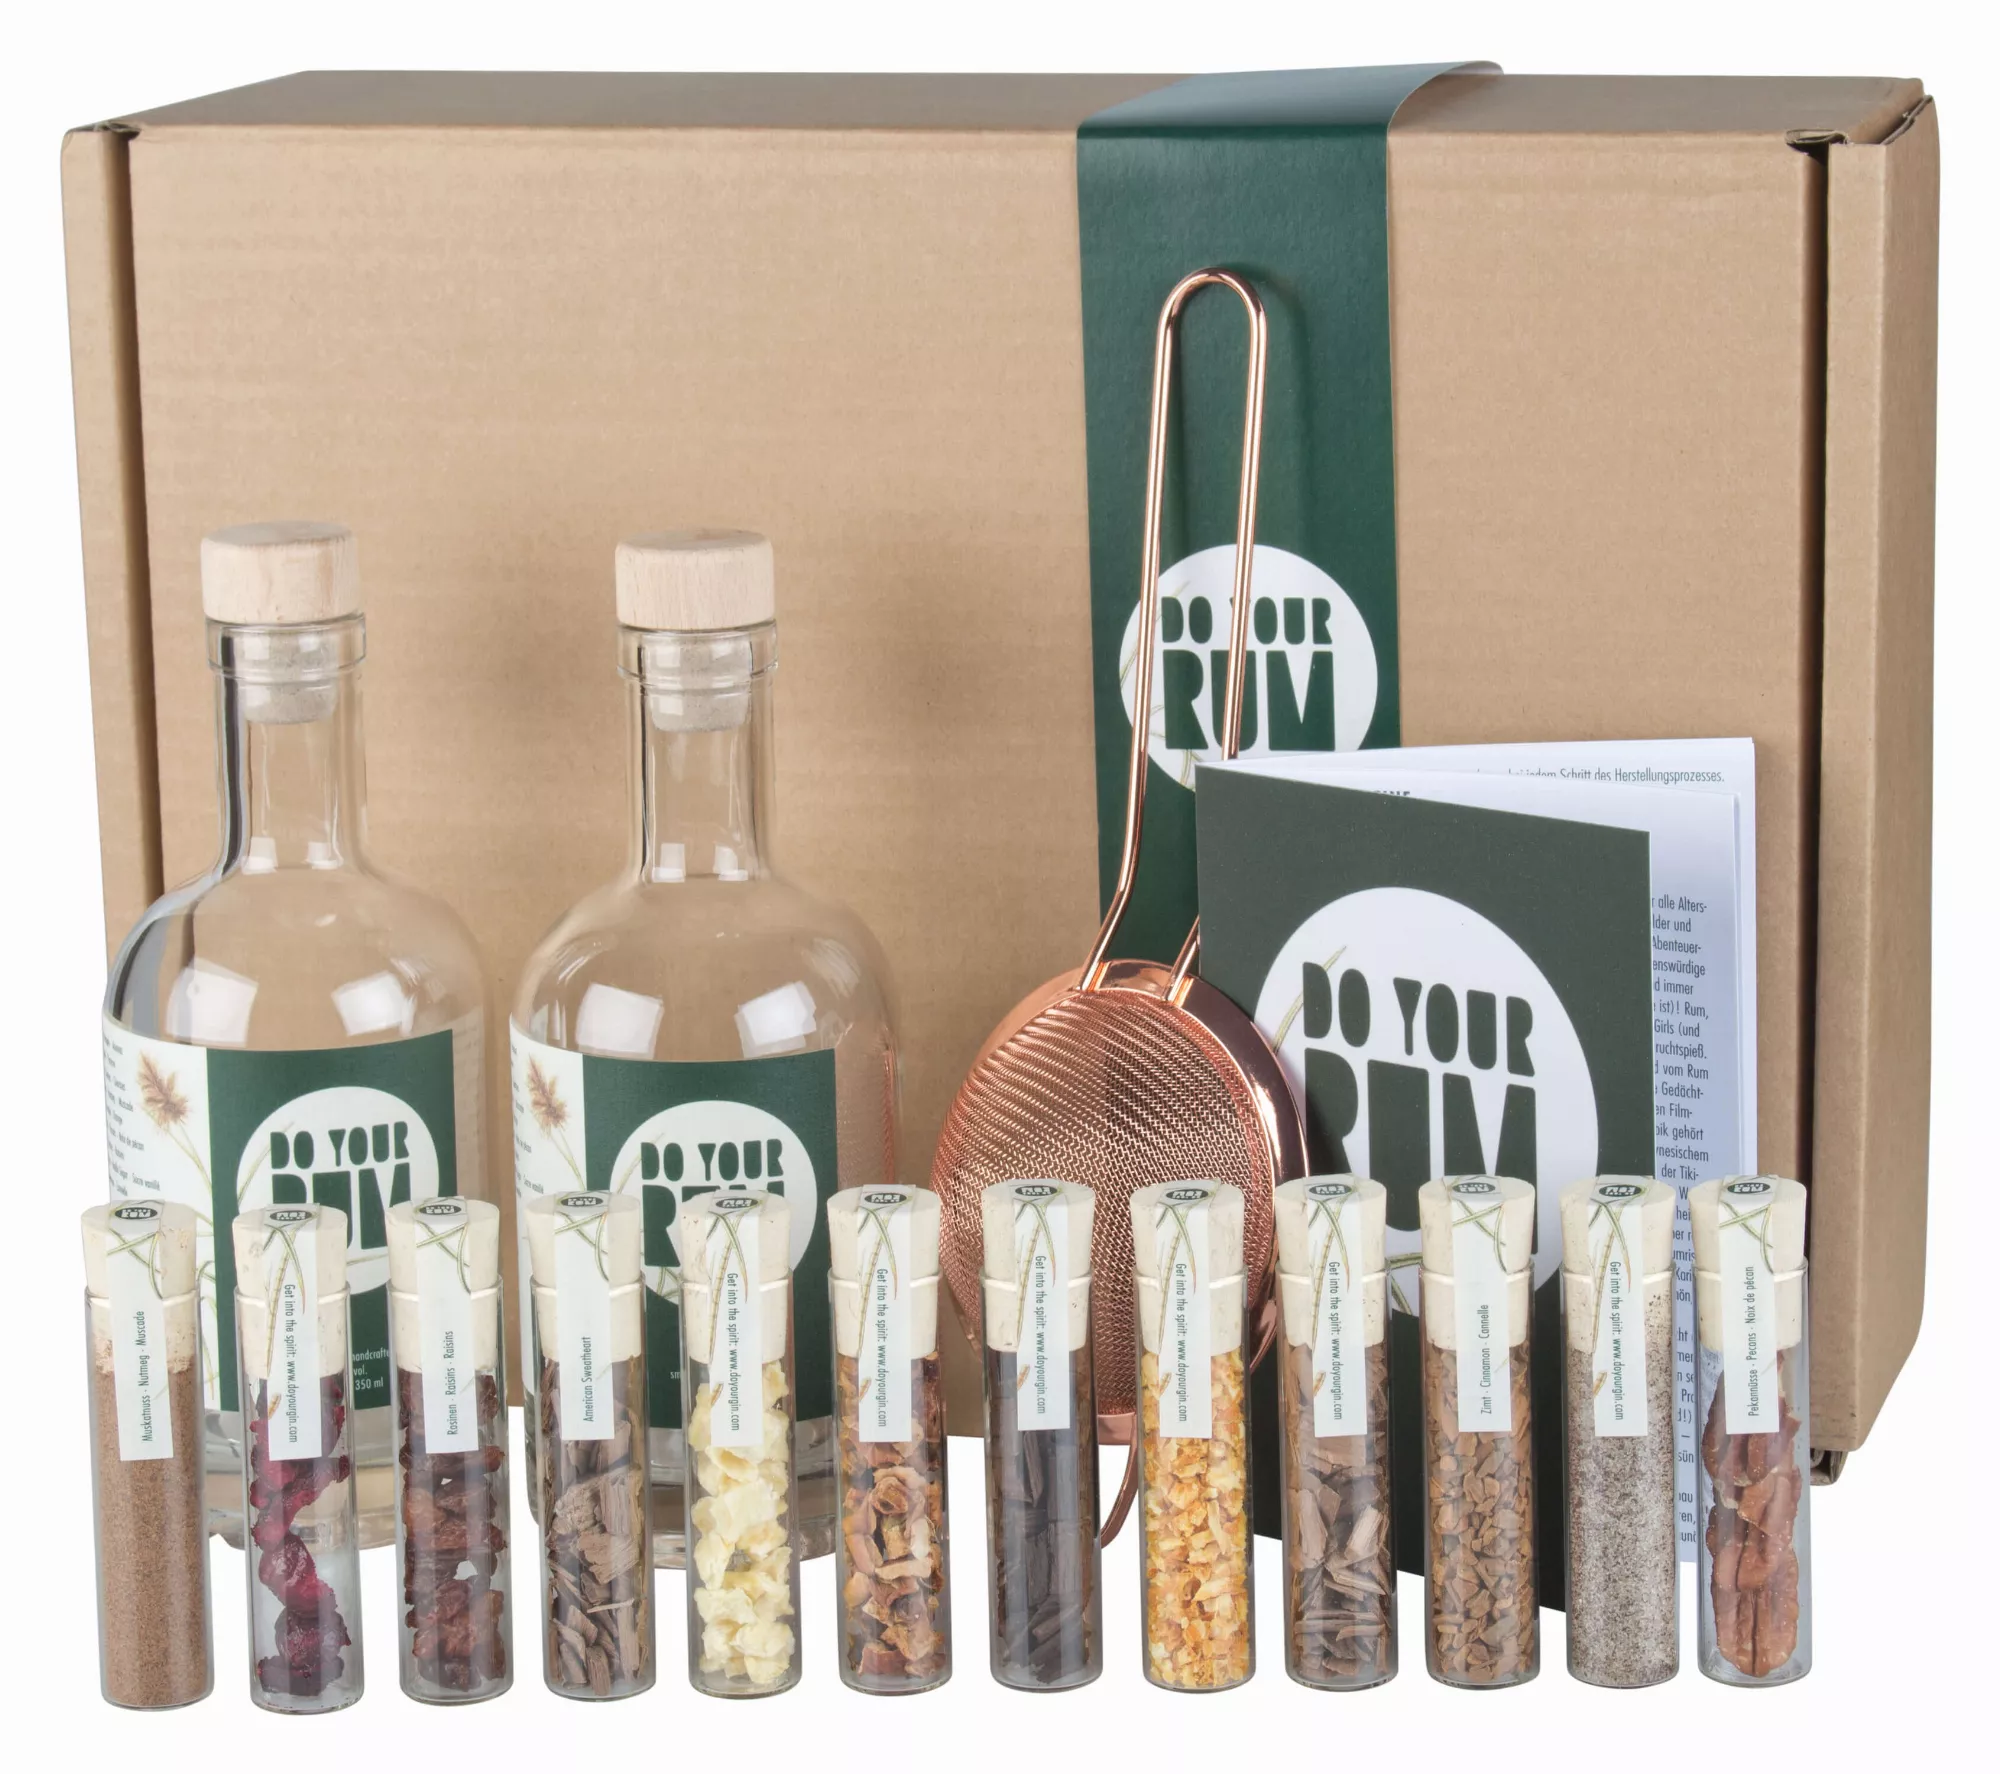 DO YOUR RUM Rum Making Kit Diy Adult Gift Kits Cool Fathers Day Gift  Bartender Gift Basket Gift for Men & Women 12 Botanicals 